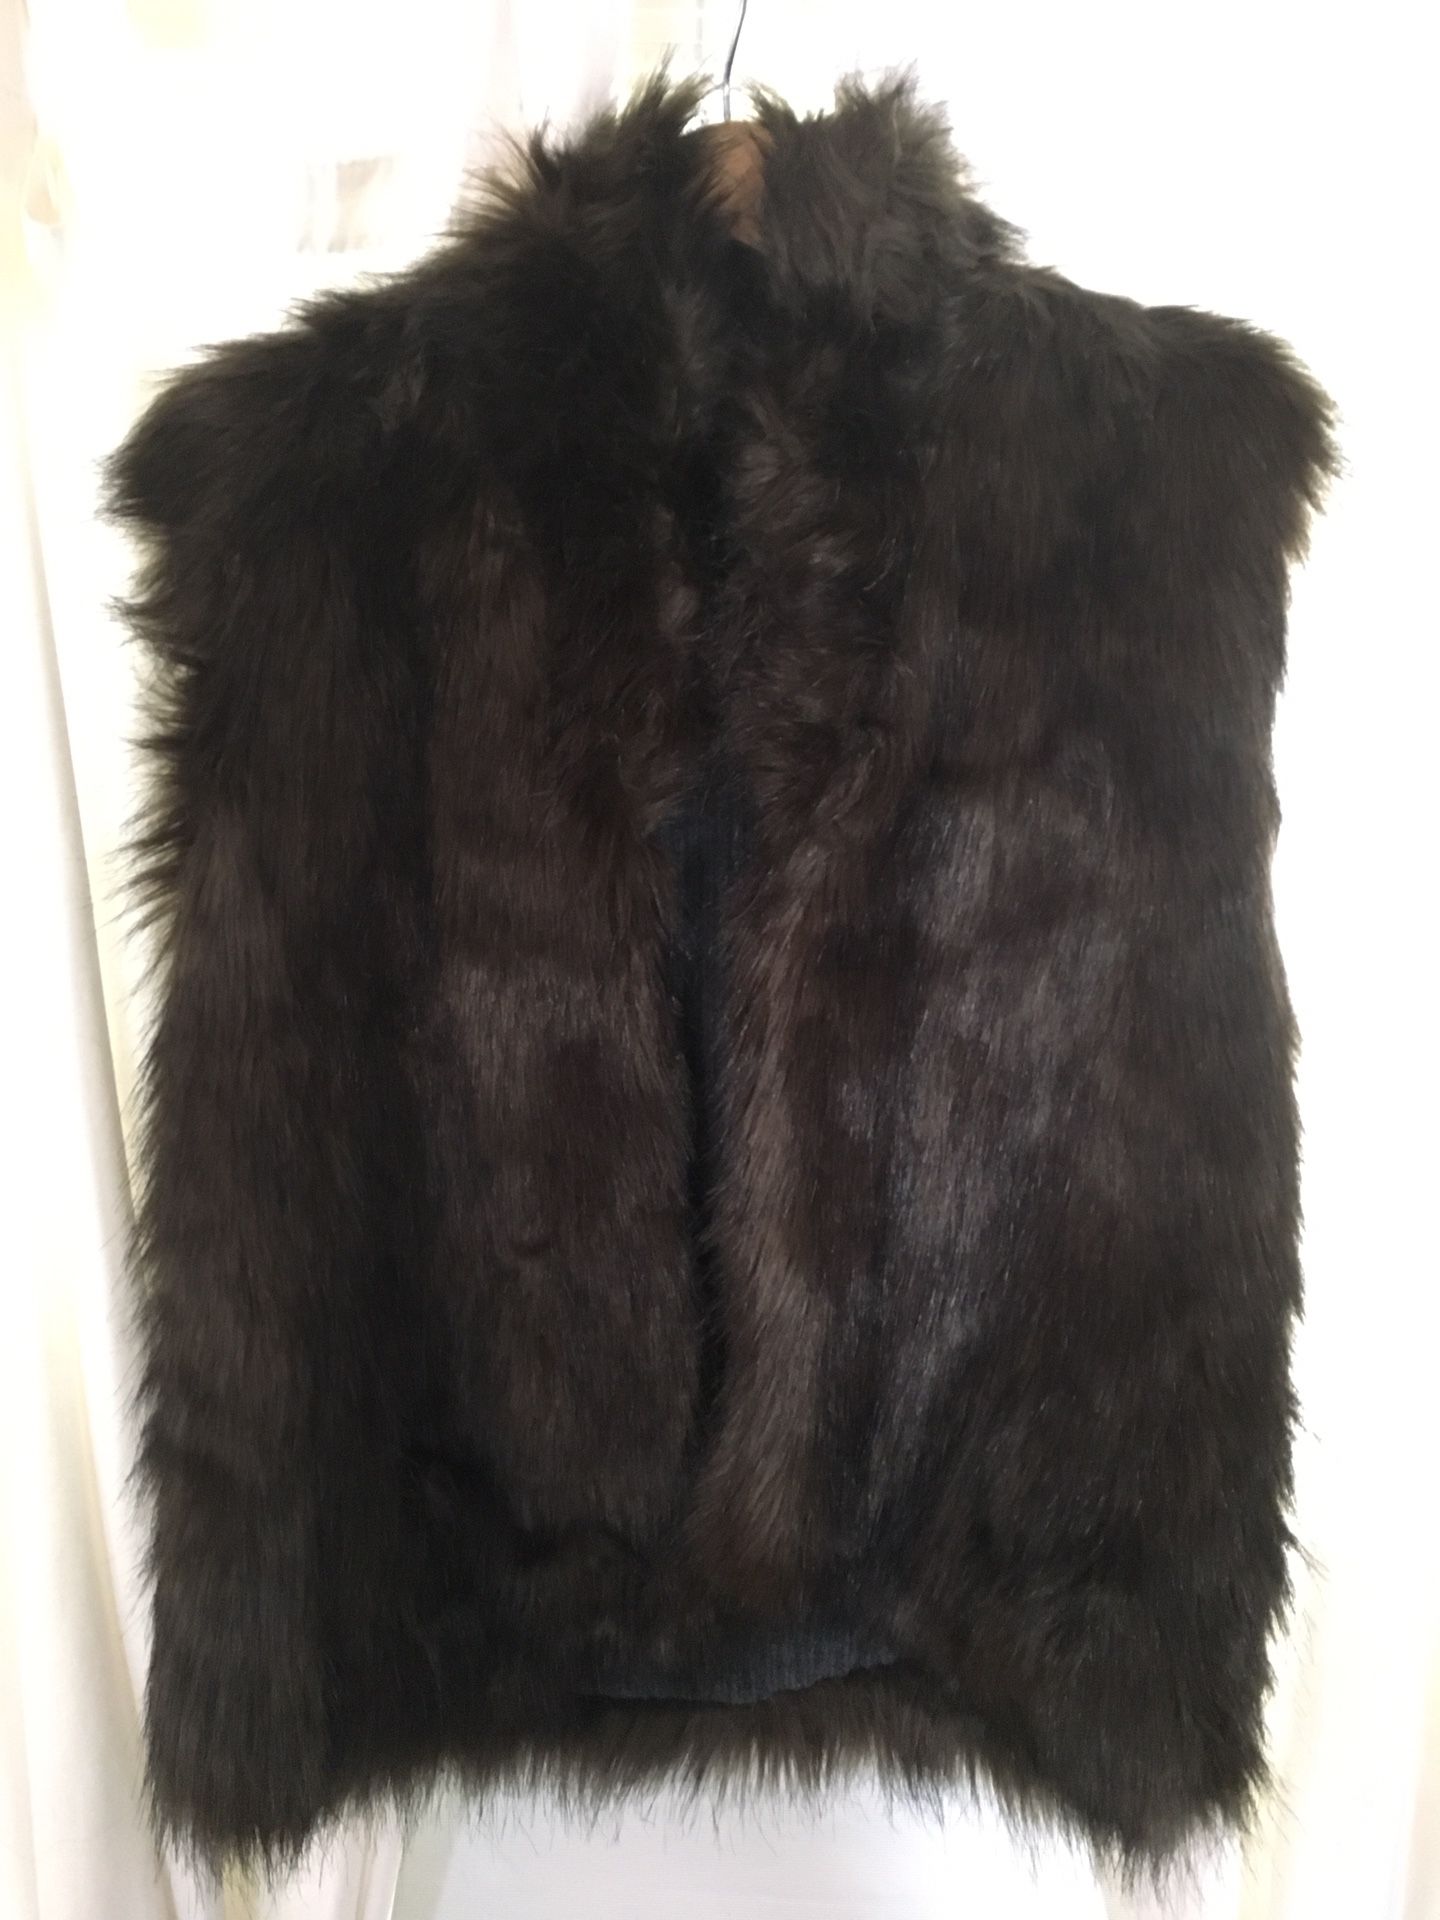 NEW Joie faux fur vest. Never worn, tags on. Size: Small